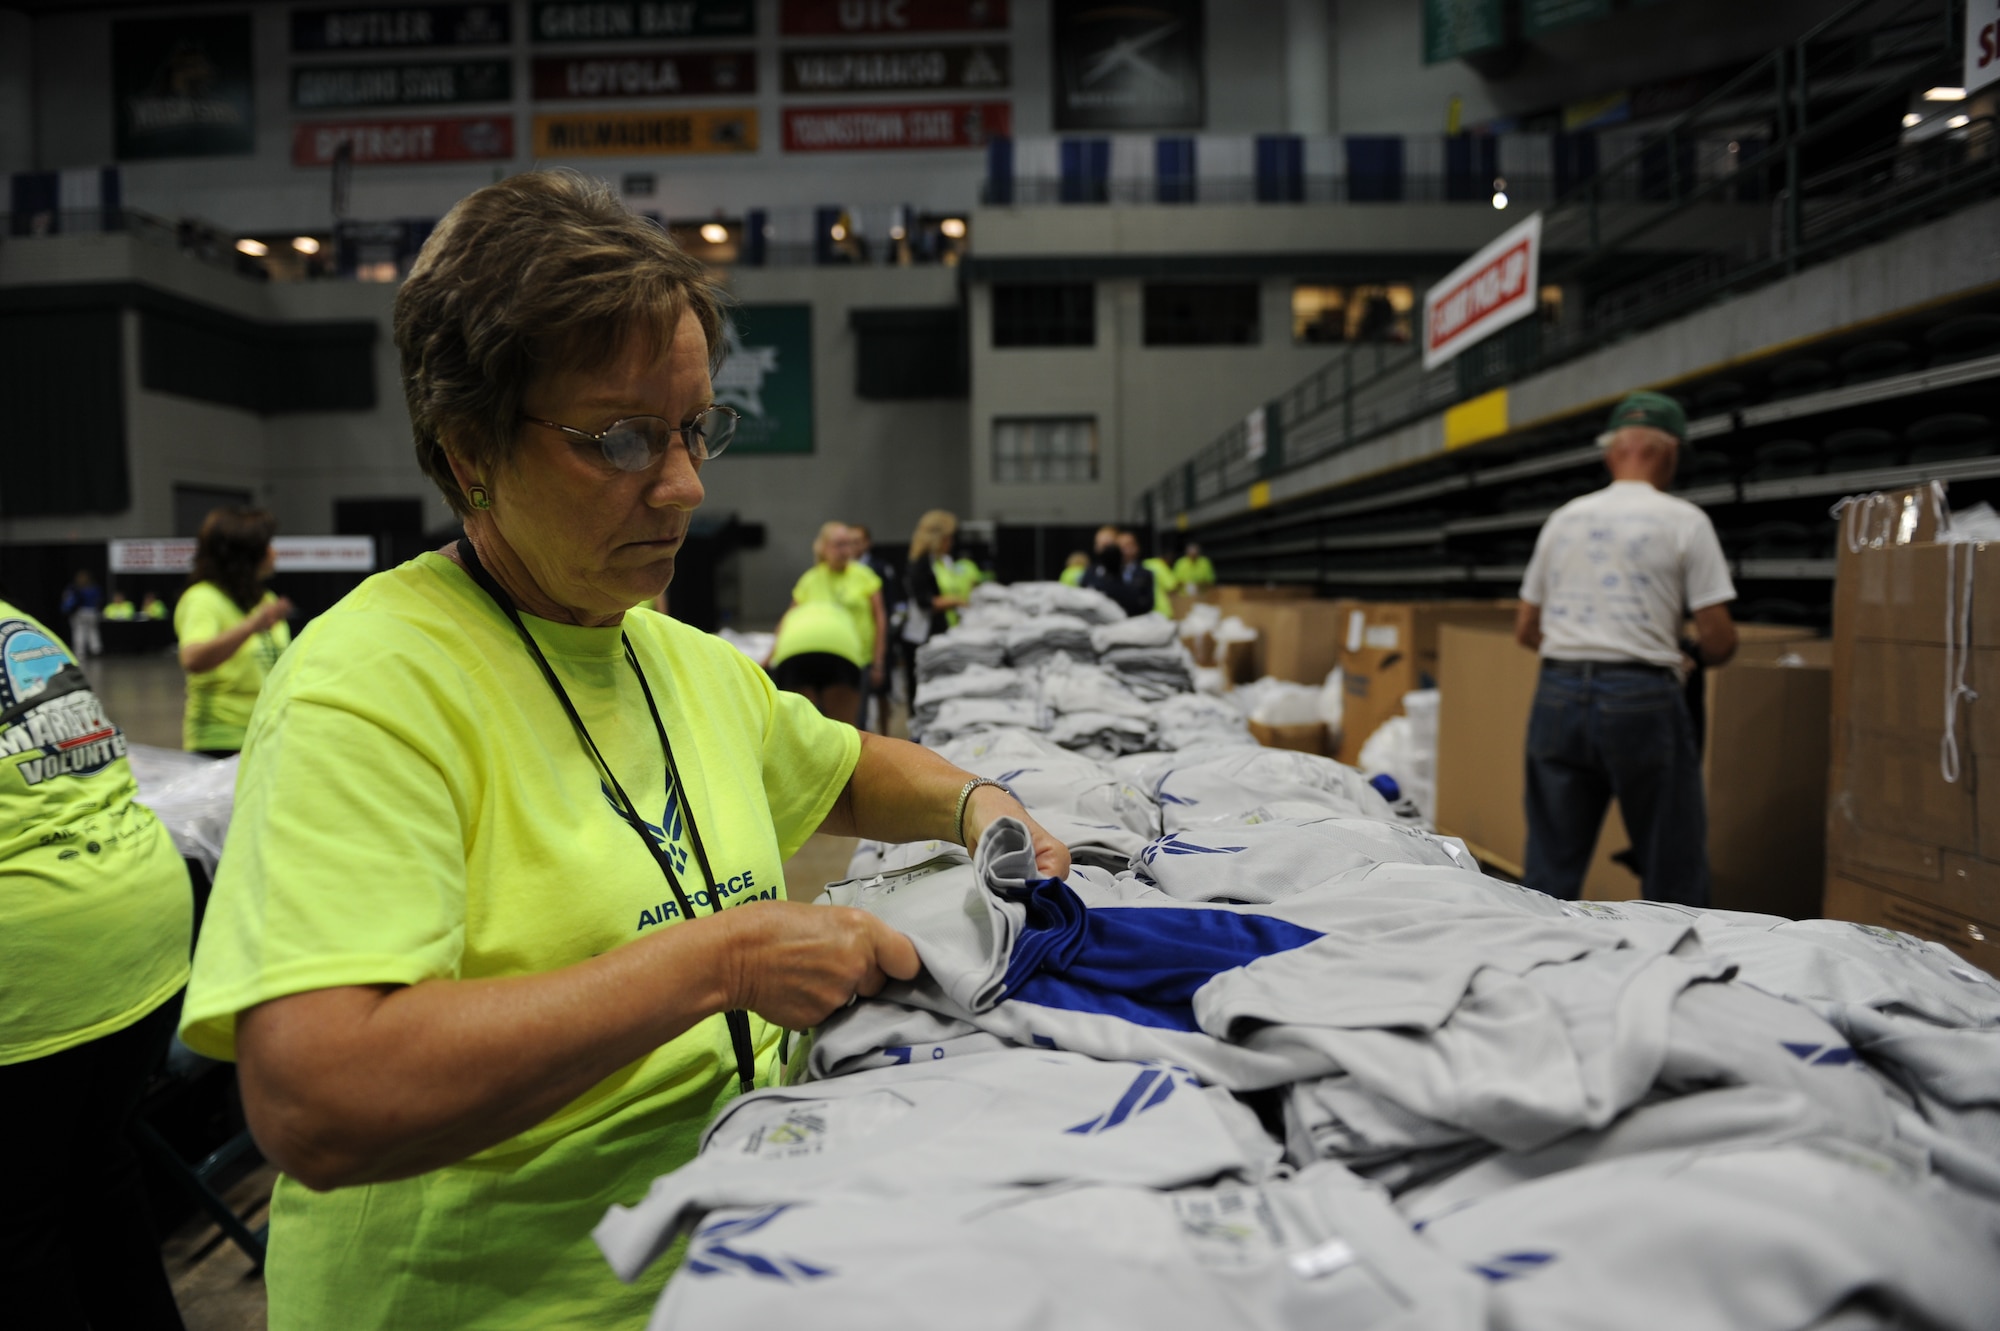 Volunteers help out at the annual Air Force Marathon in many ways, such as assisting at the Sports & Fitness Expo the two days prior to the race. Volunteers can help with runner bib pick-up, shirt distribution, security, merchandise sales and more. 